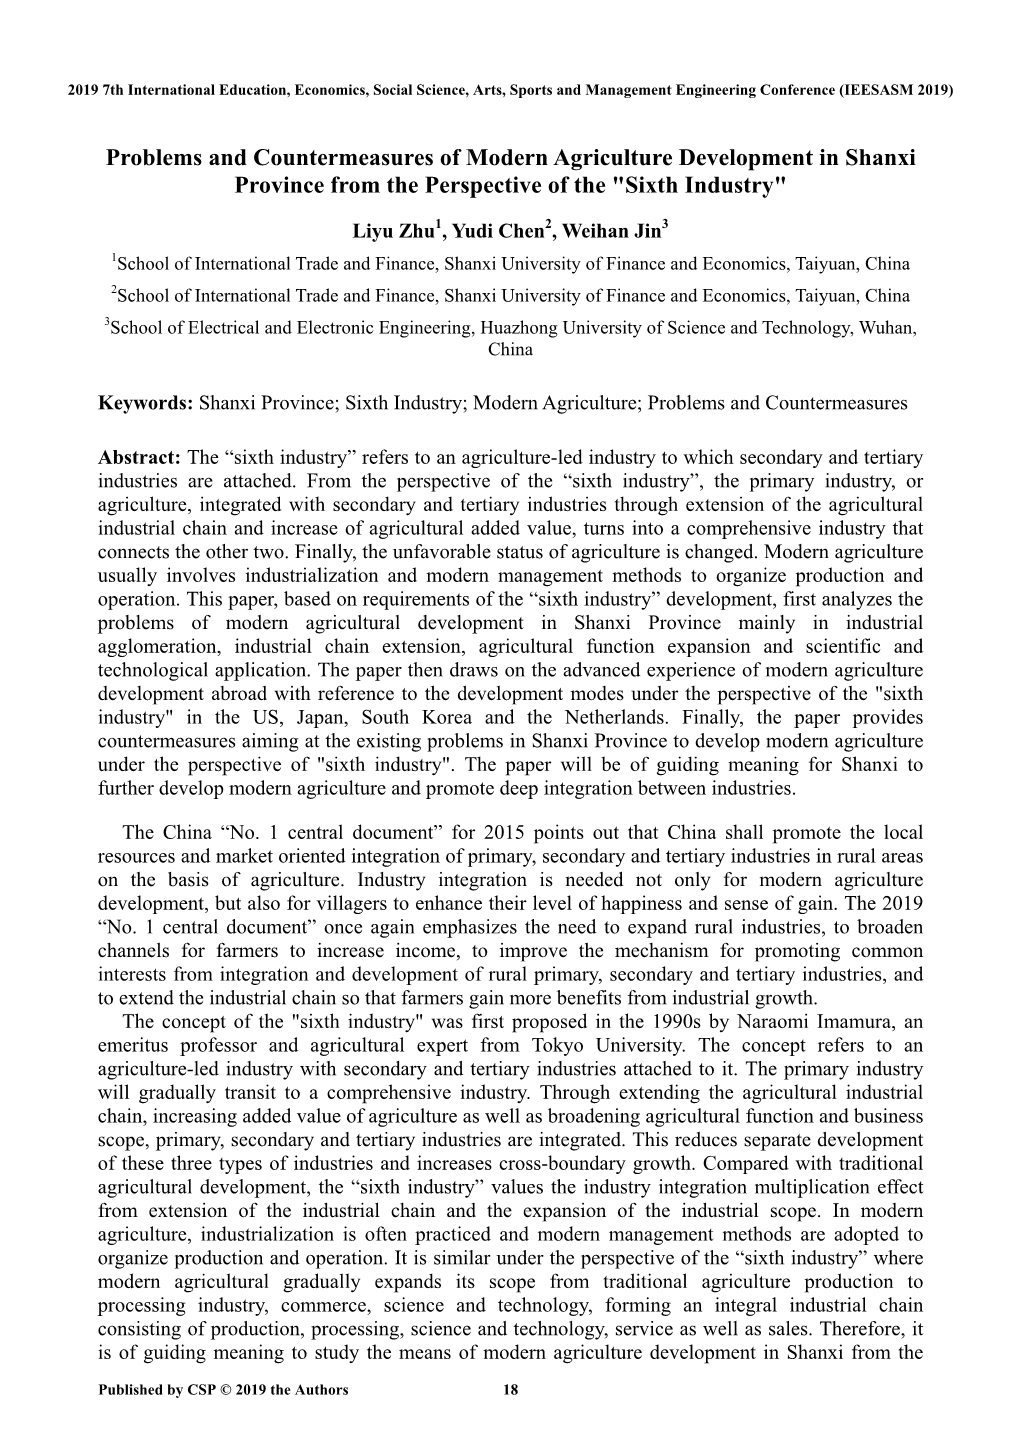 Problems and Countermeasures of Modern Agriculture Development in Shanxi Province from the Perspective of the "Sixth Industry"